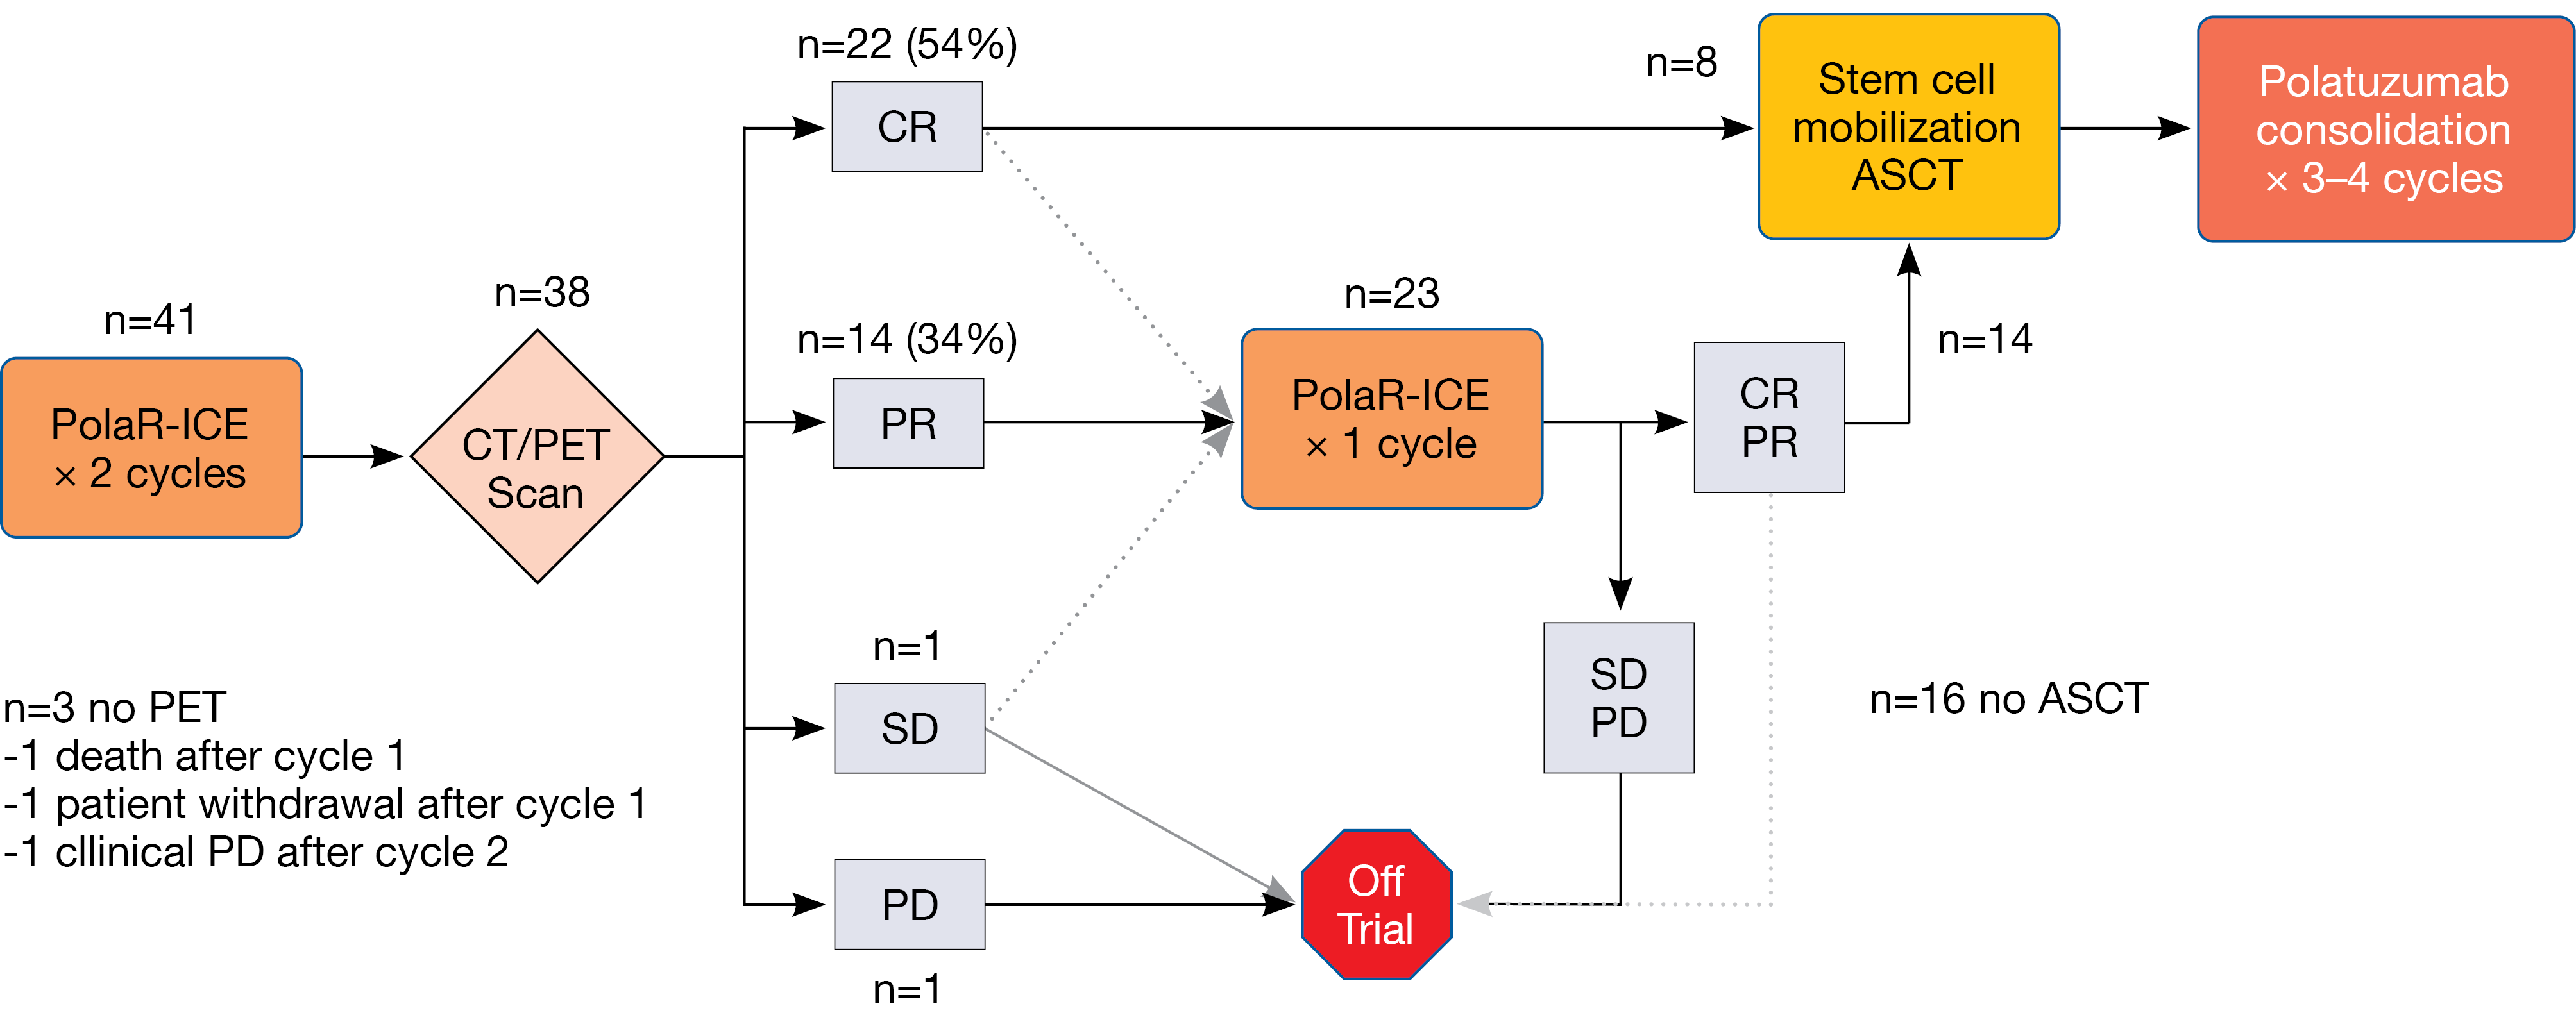 Figure: Responses to PolaR-ICE after 2 cycles and at the end of salvage treatment